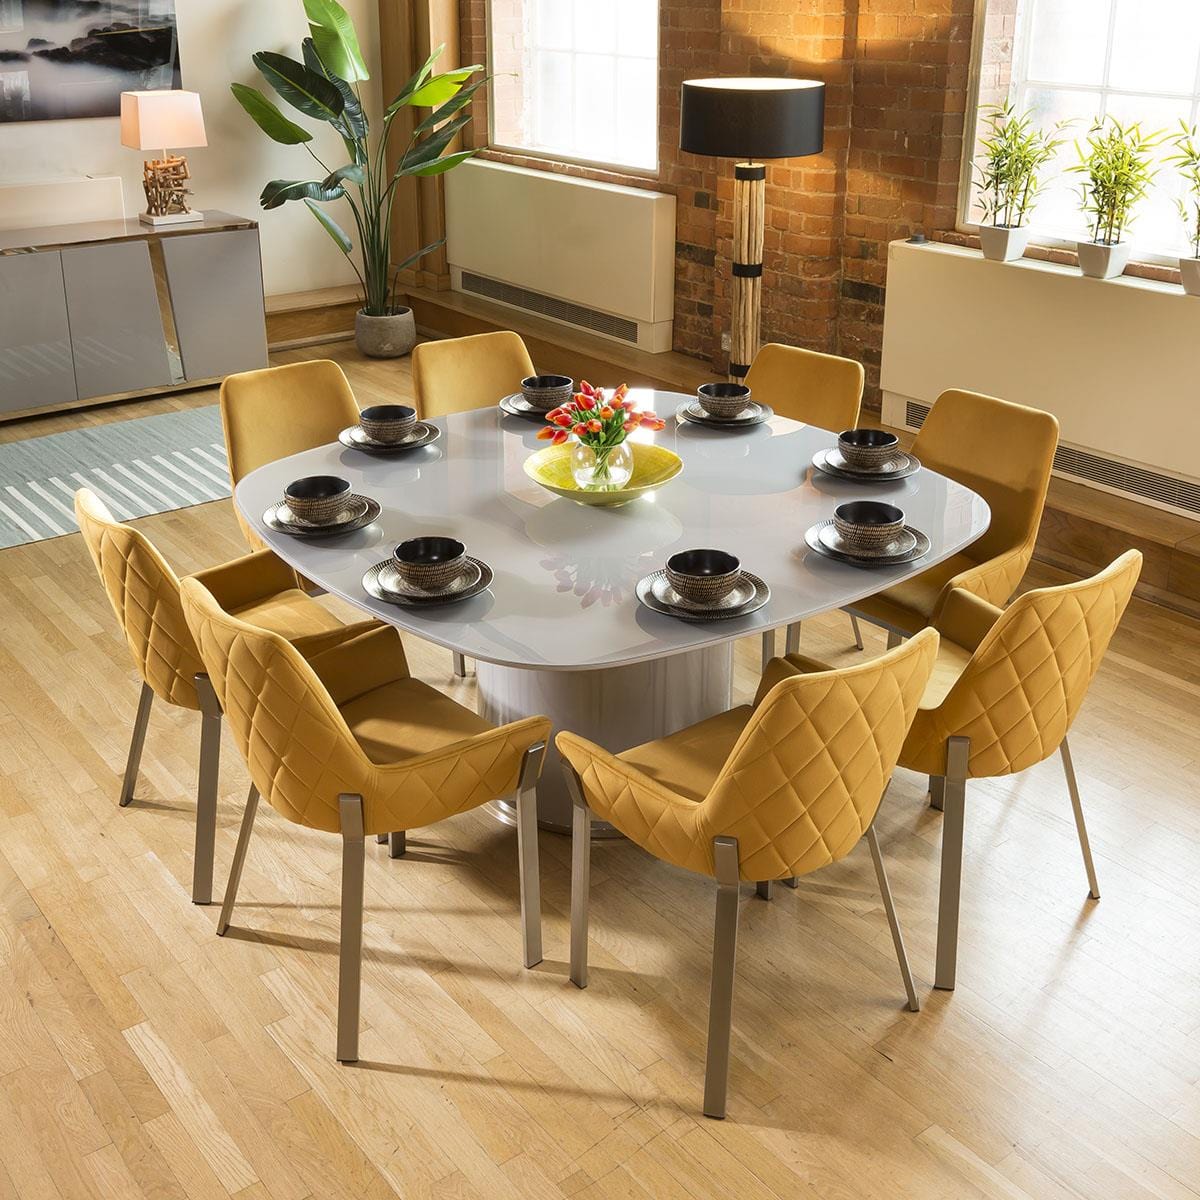 Quatropi Huge Grey Square Glass Top Dining Set & 8 x Mustard & Stainless Chairs